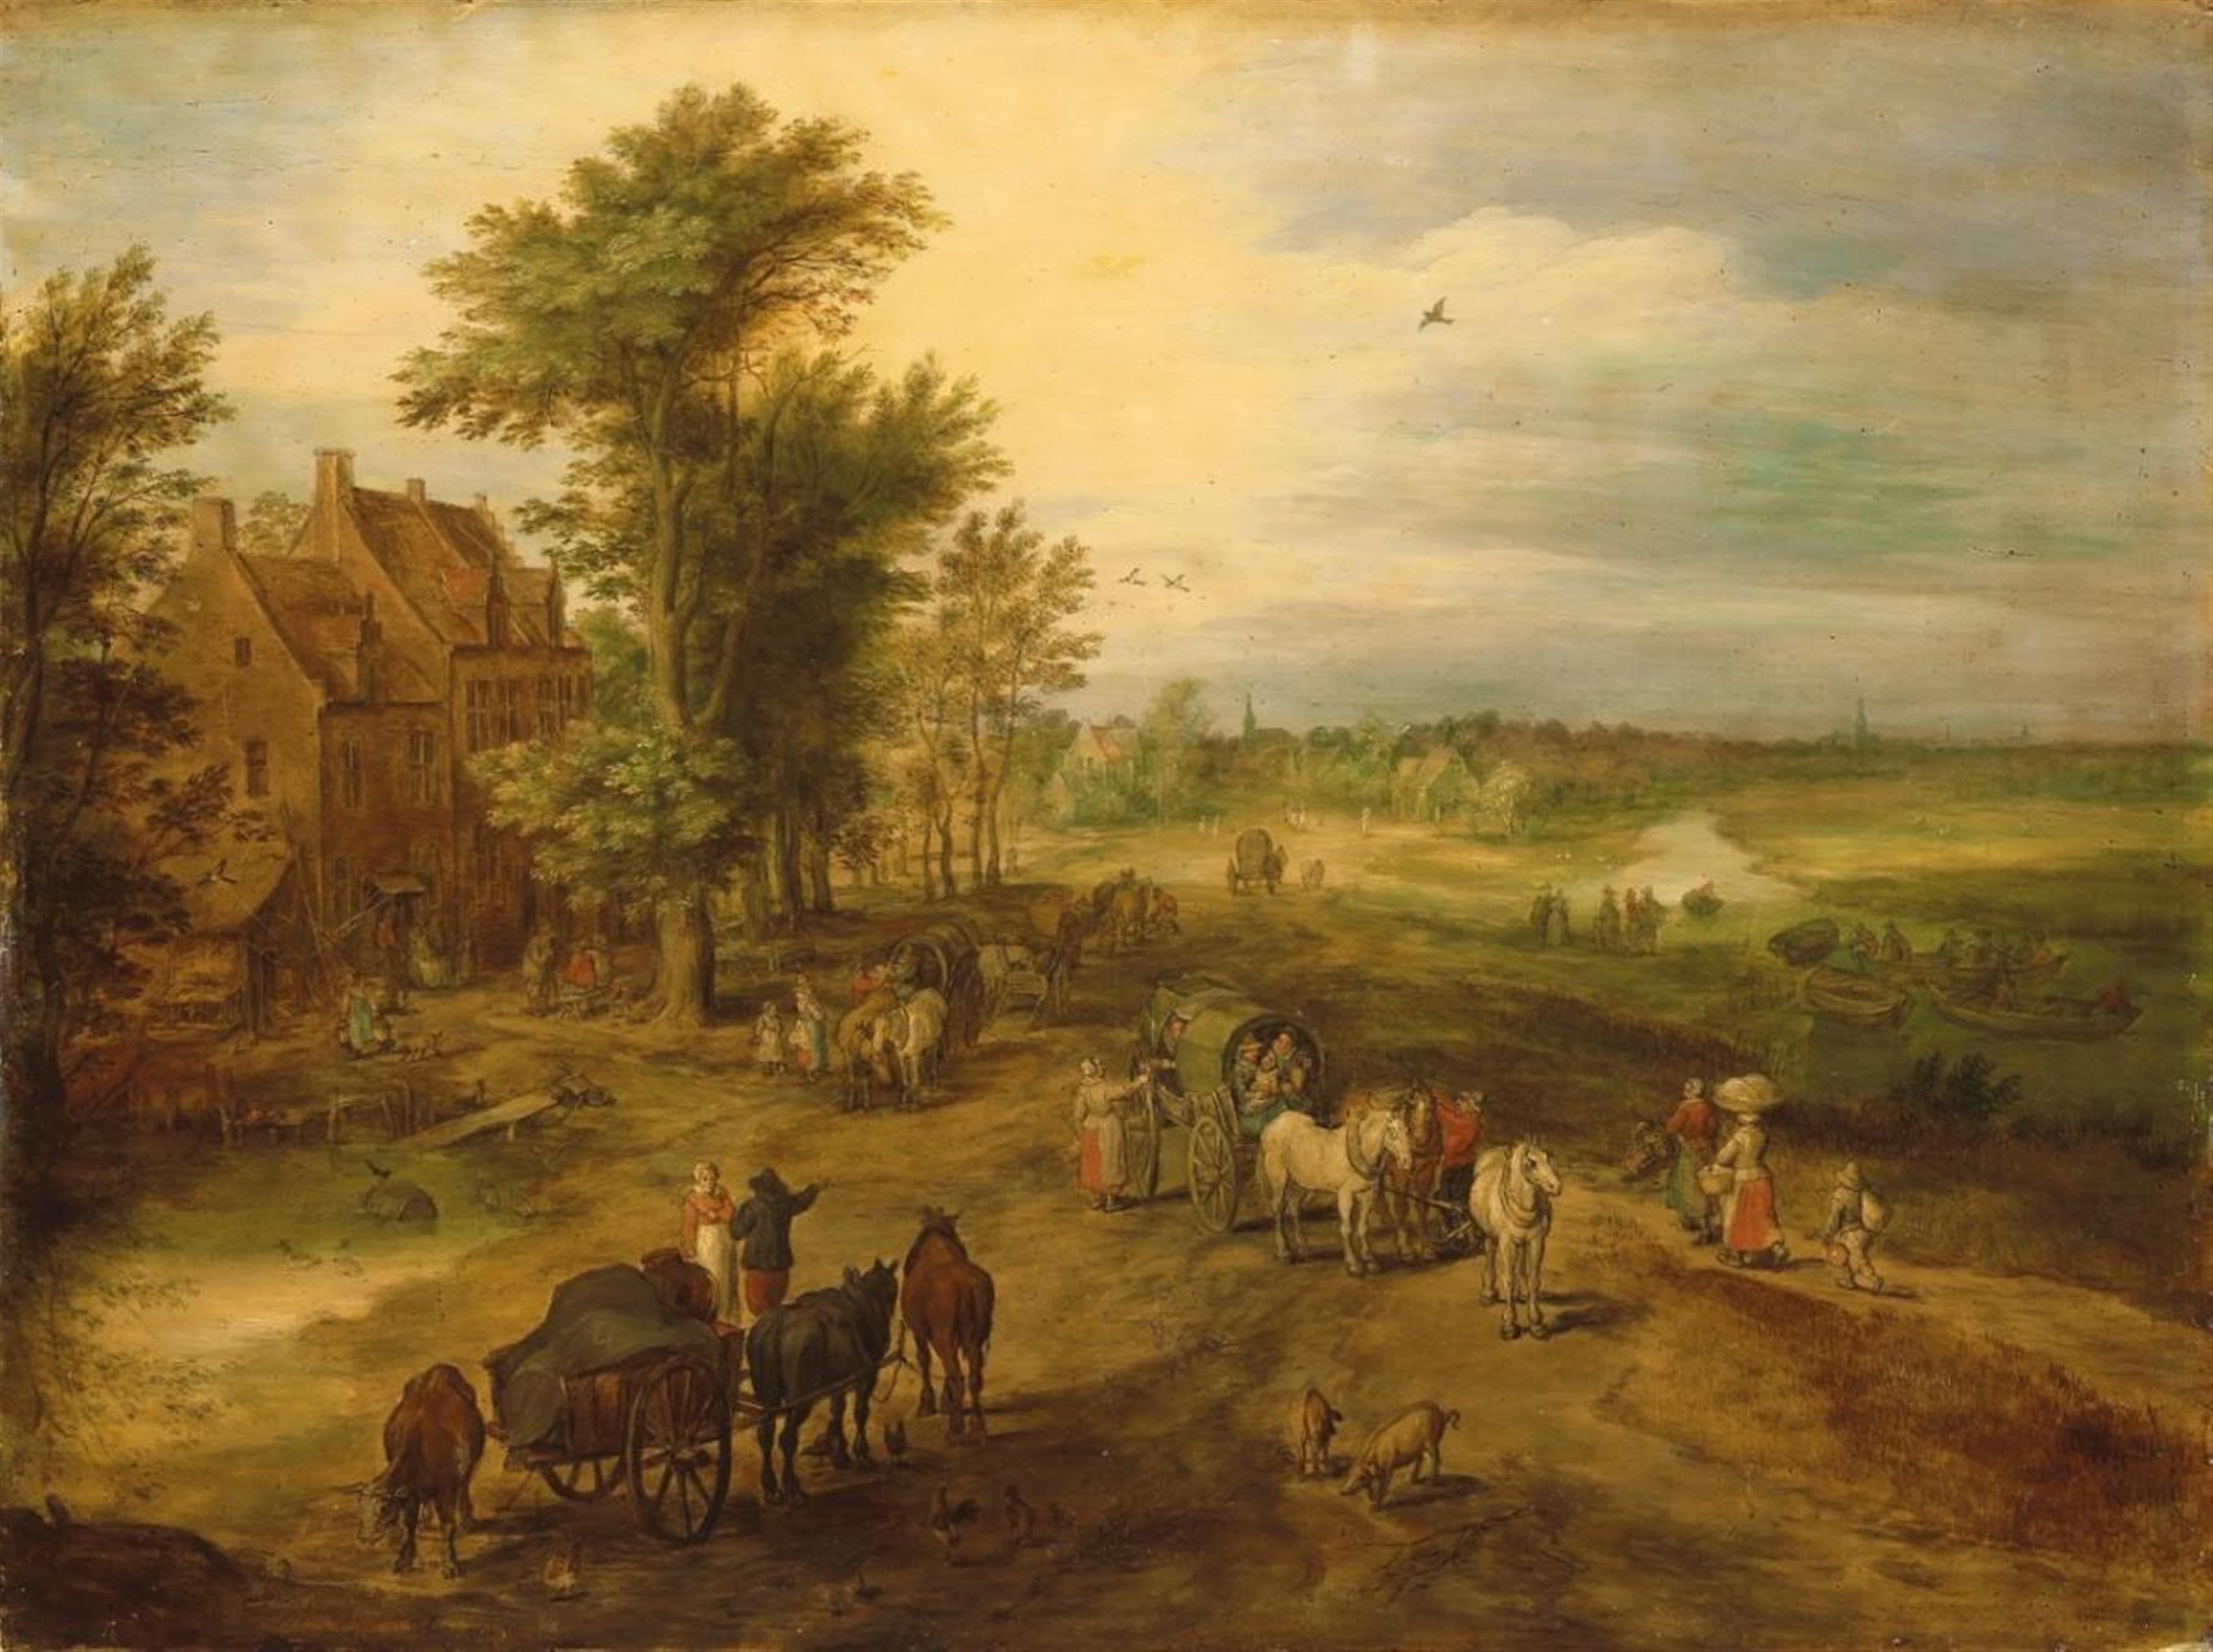 Jan Brueghel the Elder, follower of - VILLAGE WITH TRAVELLERS AND PEASANTS - image-1